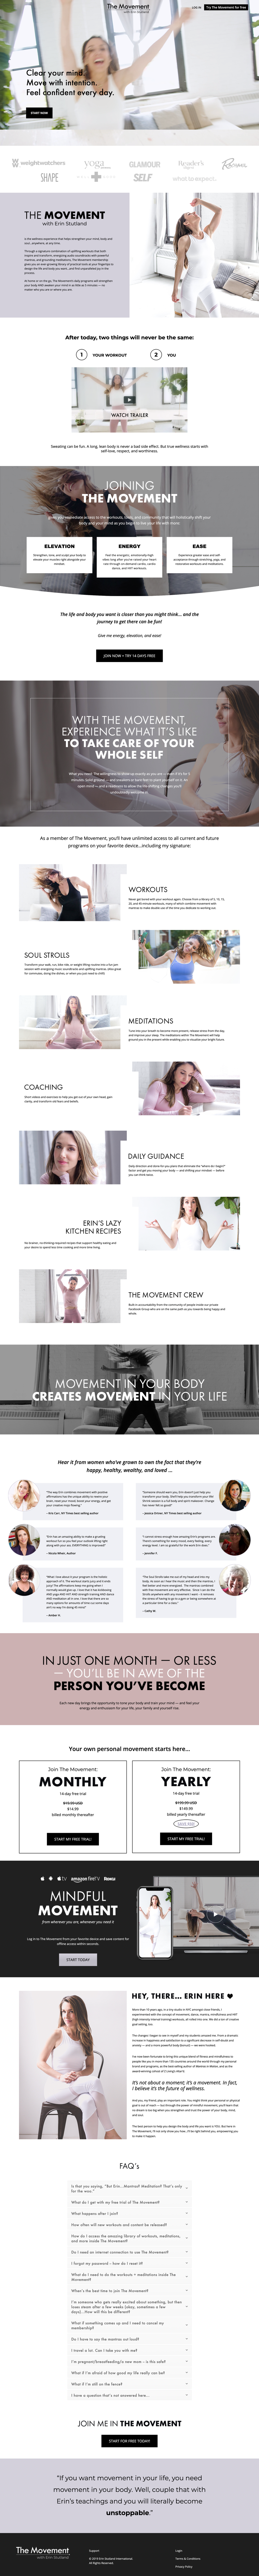 The Movement by Erin Stutand sales page